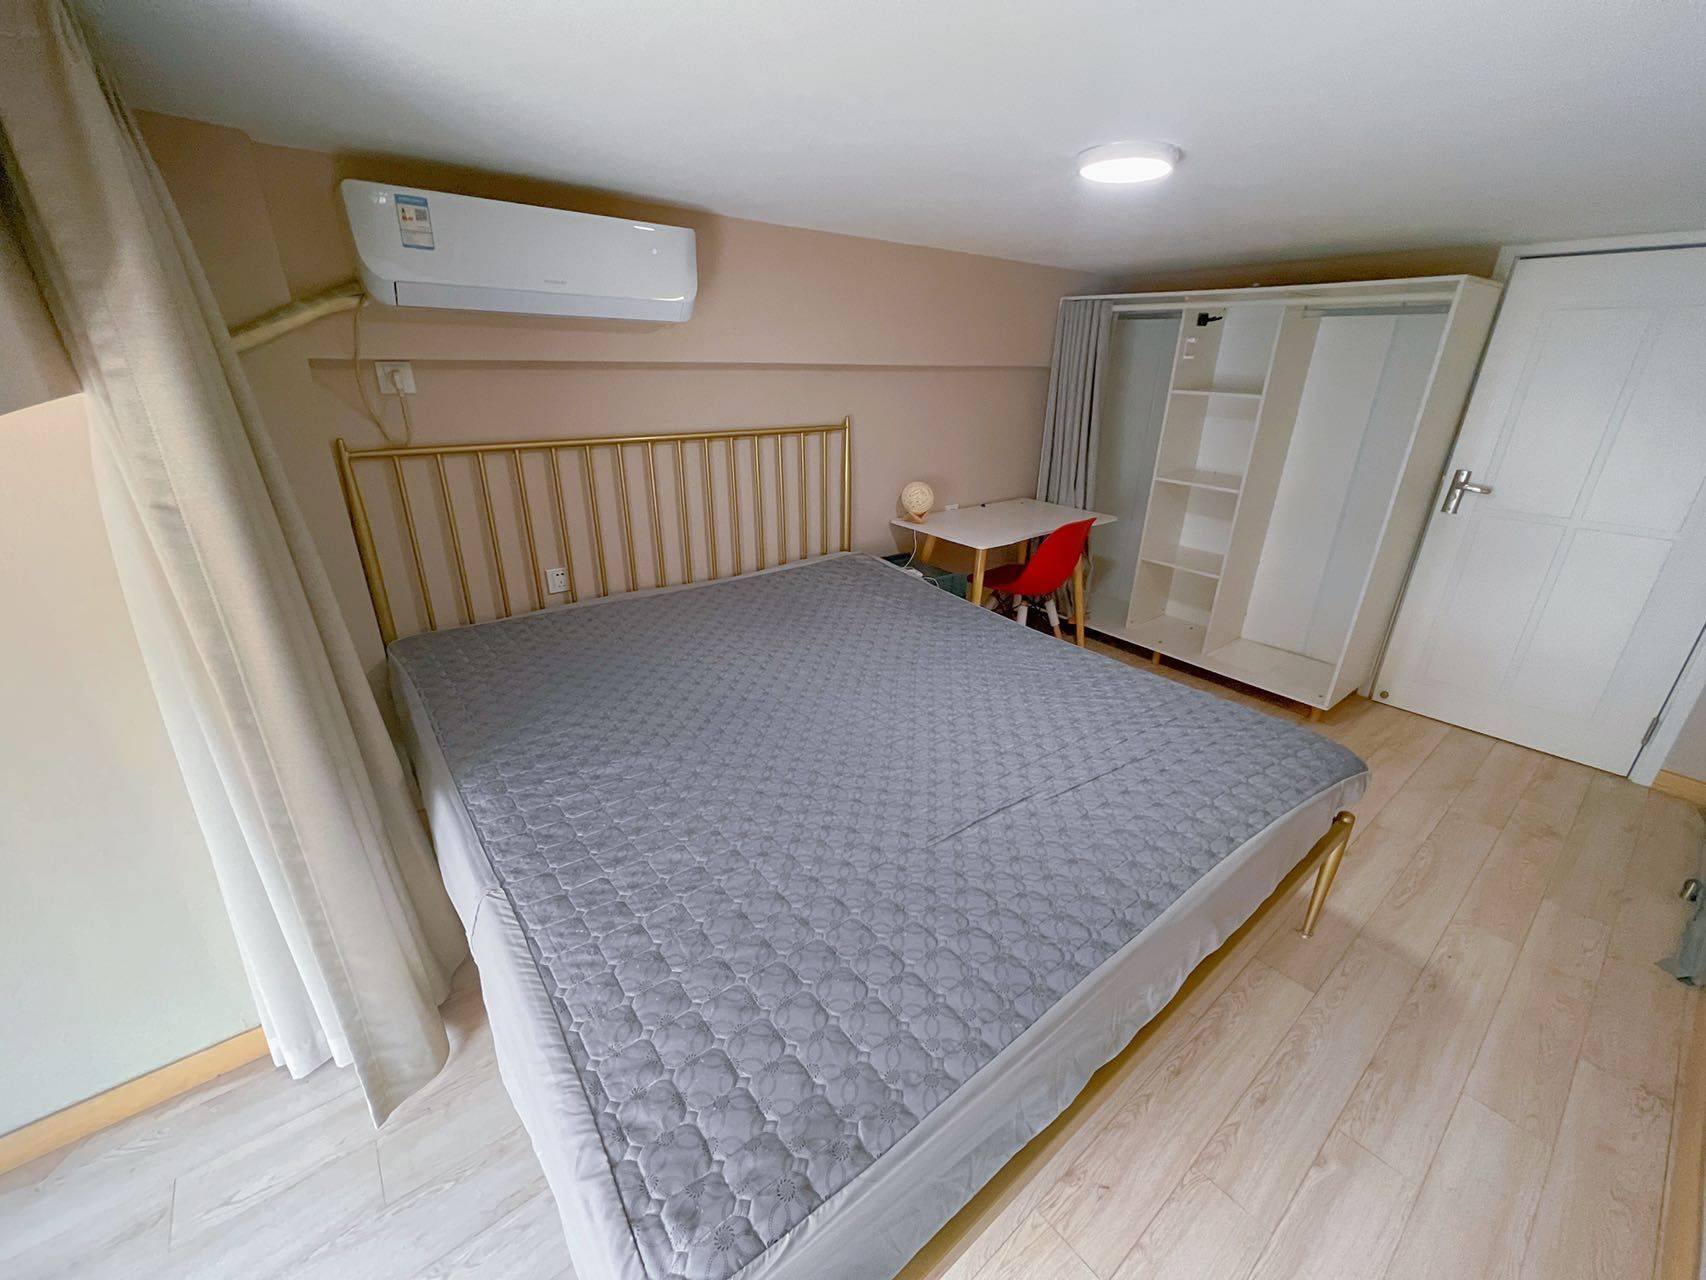 Beijing-Shunyi-Cozy Home,Clean&Comfy,No Gender Limit,Hustle & Bustle,Chilled